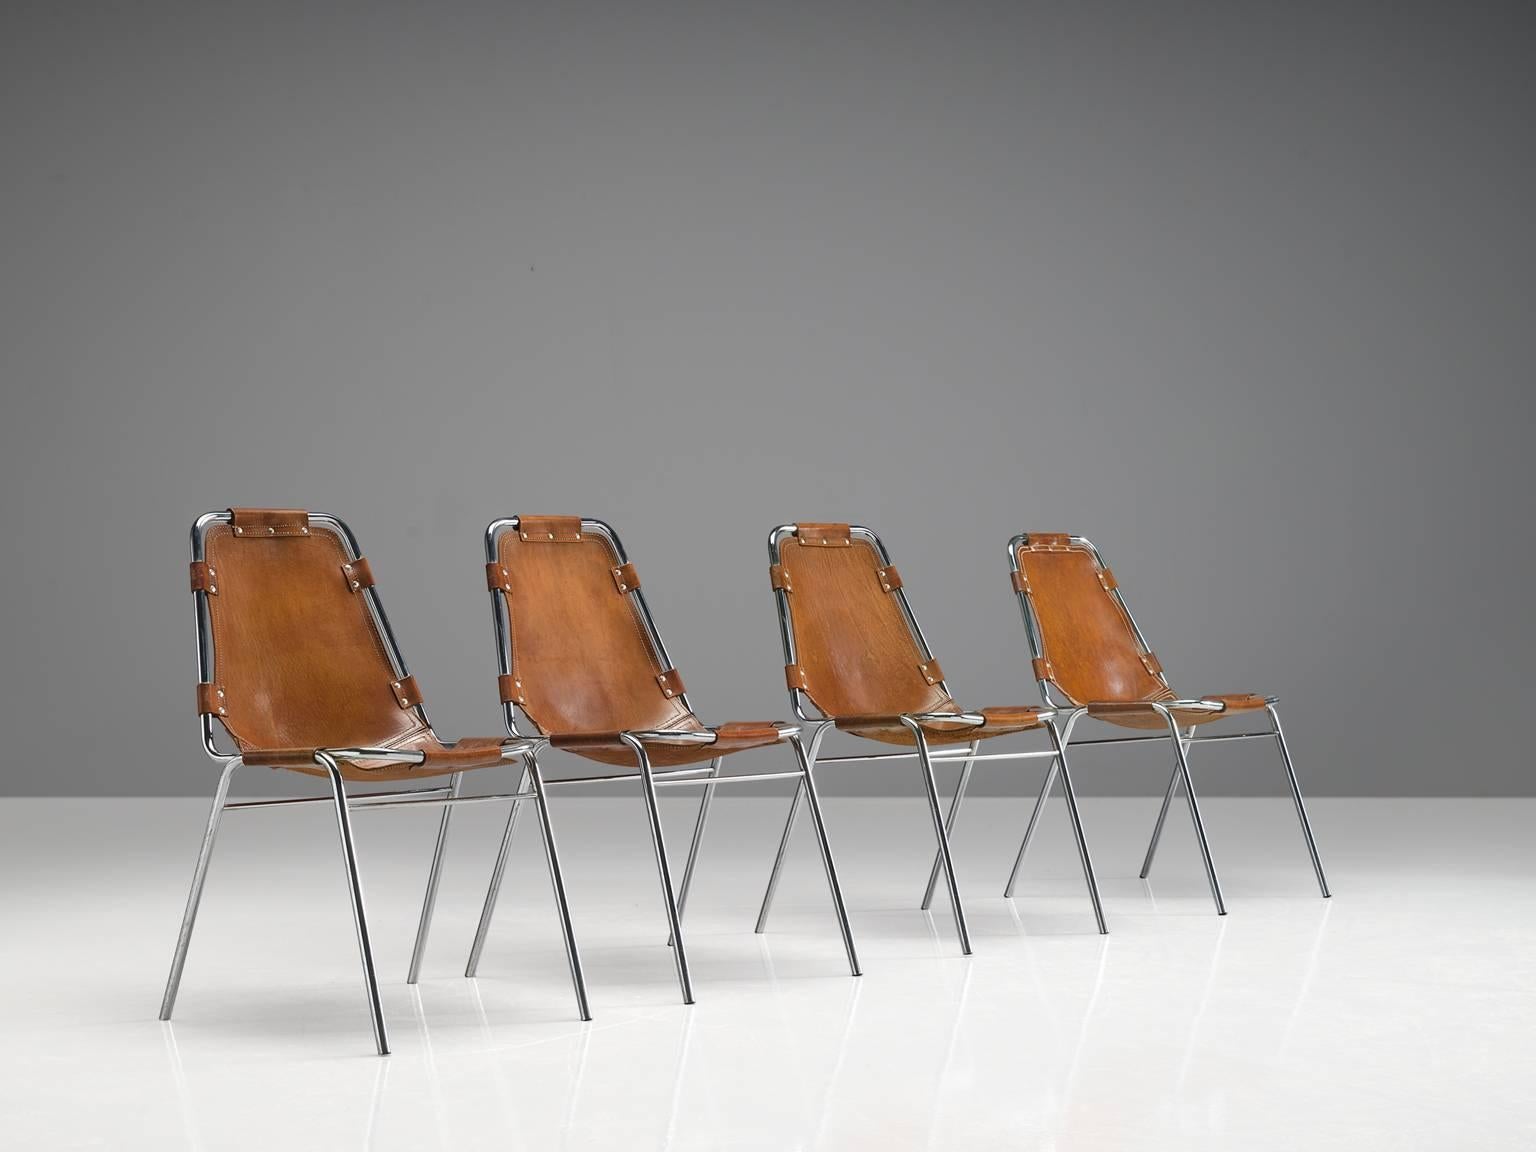 Set of four chairs, in steel and leather, France, circa 1970s. 

Set of four chairs of the famous model 'Les Arcs.' The simplistic design consists of a tubular steel frame with a seating of thick cognac saddle leather. The natural leather makes a